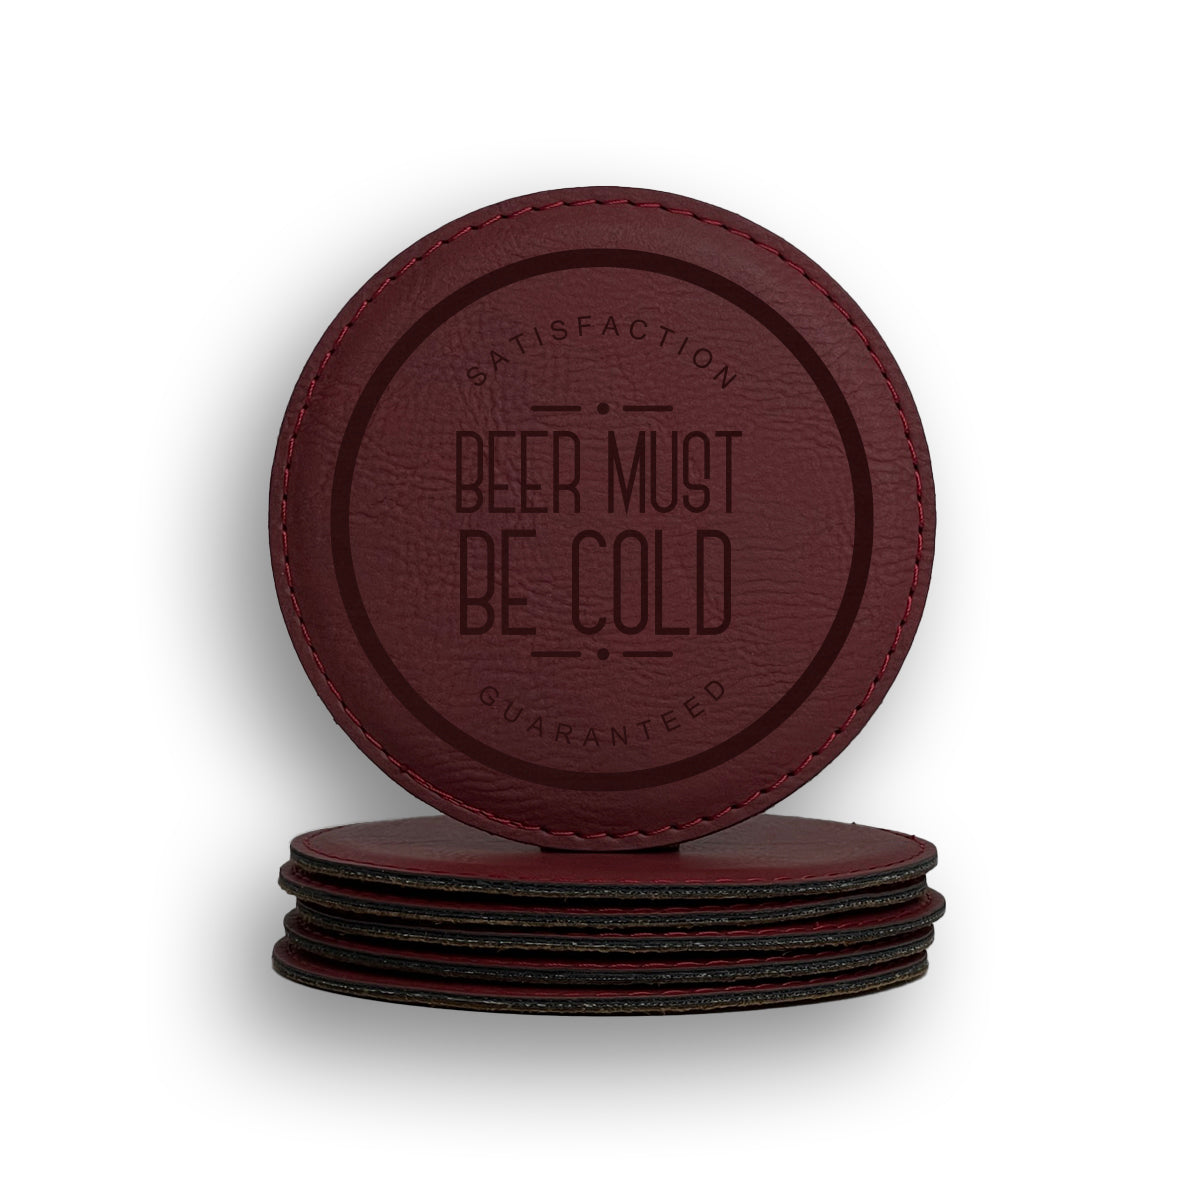 Beer Must Be Cold Coaster